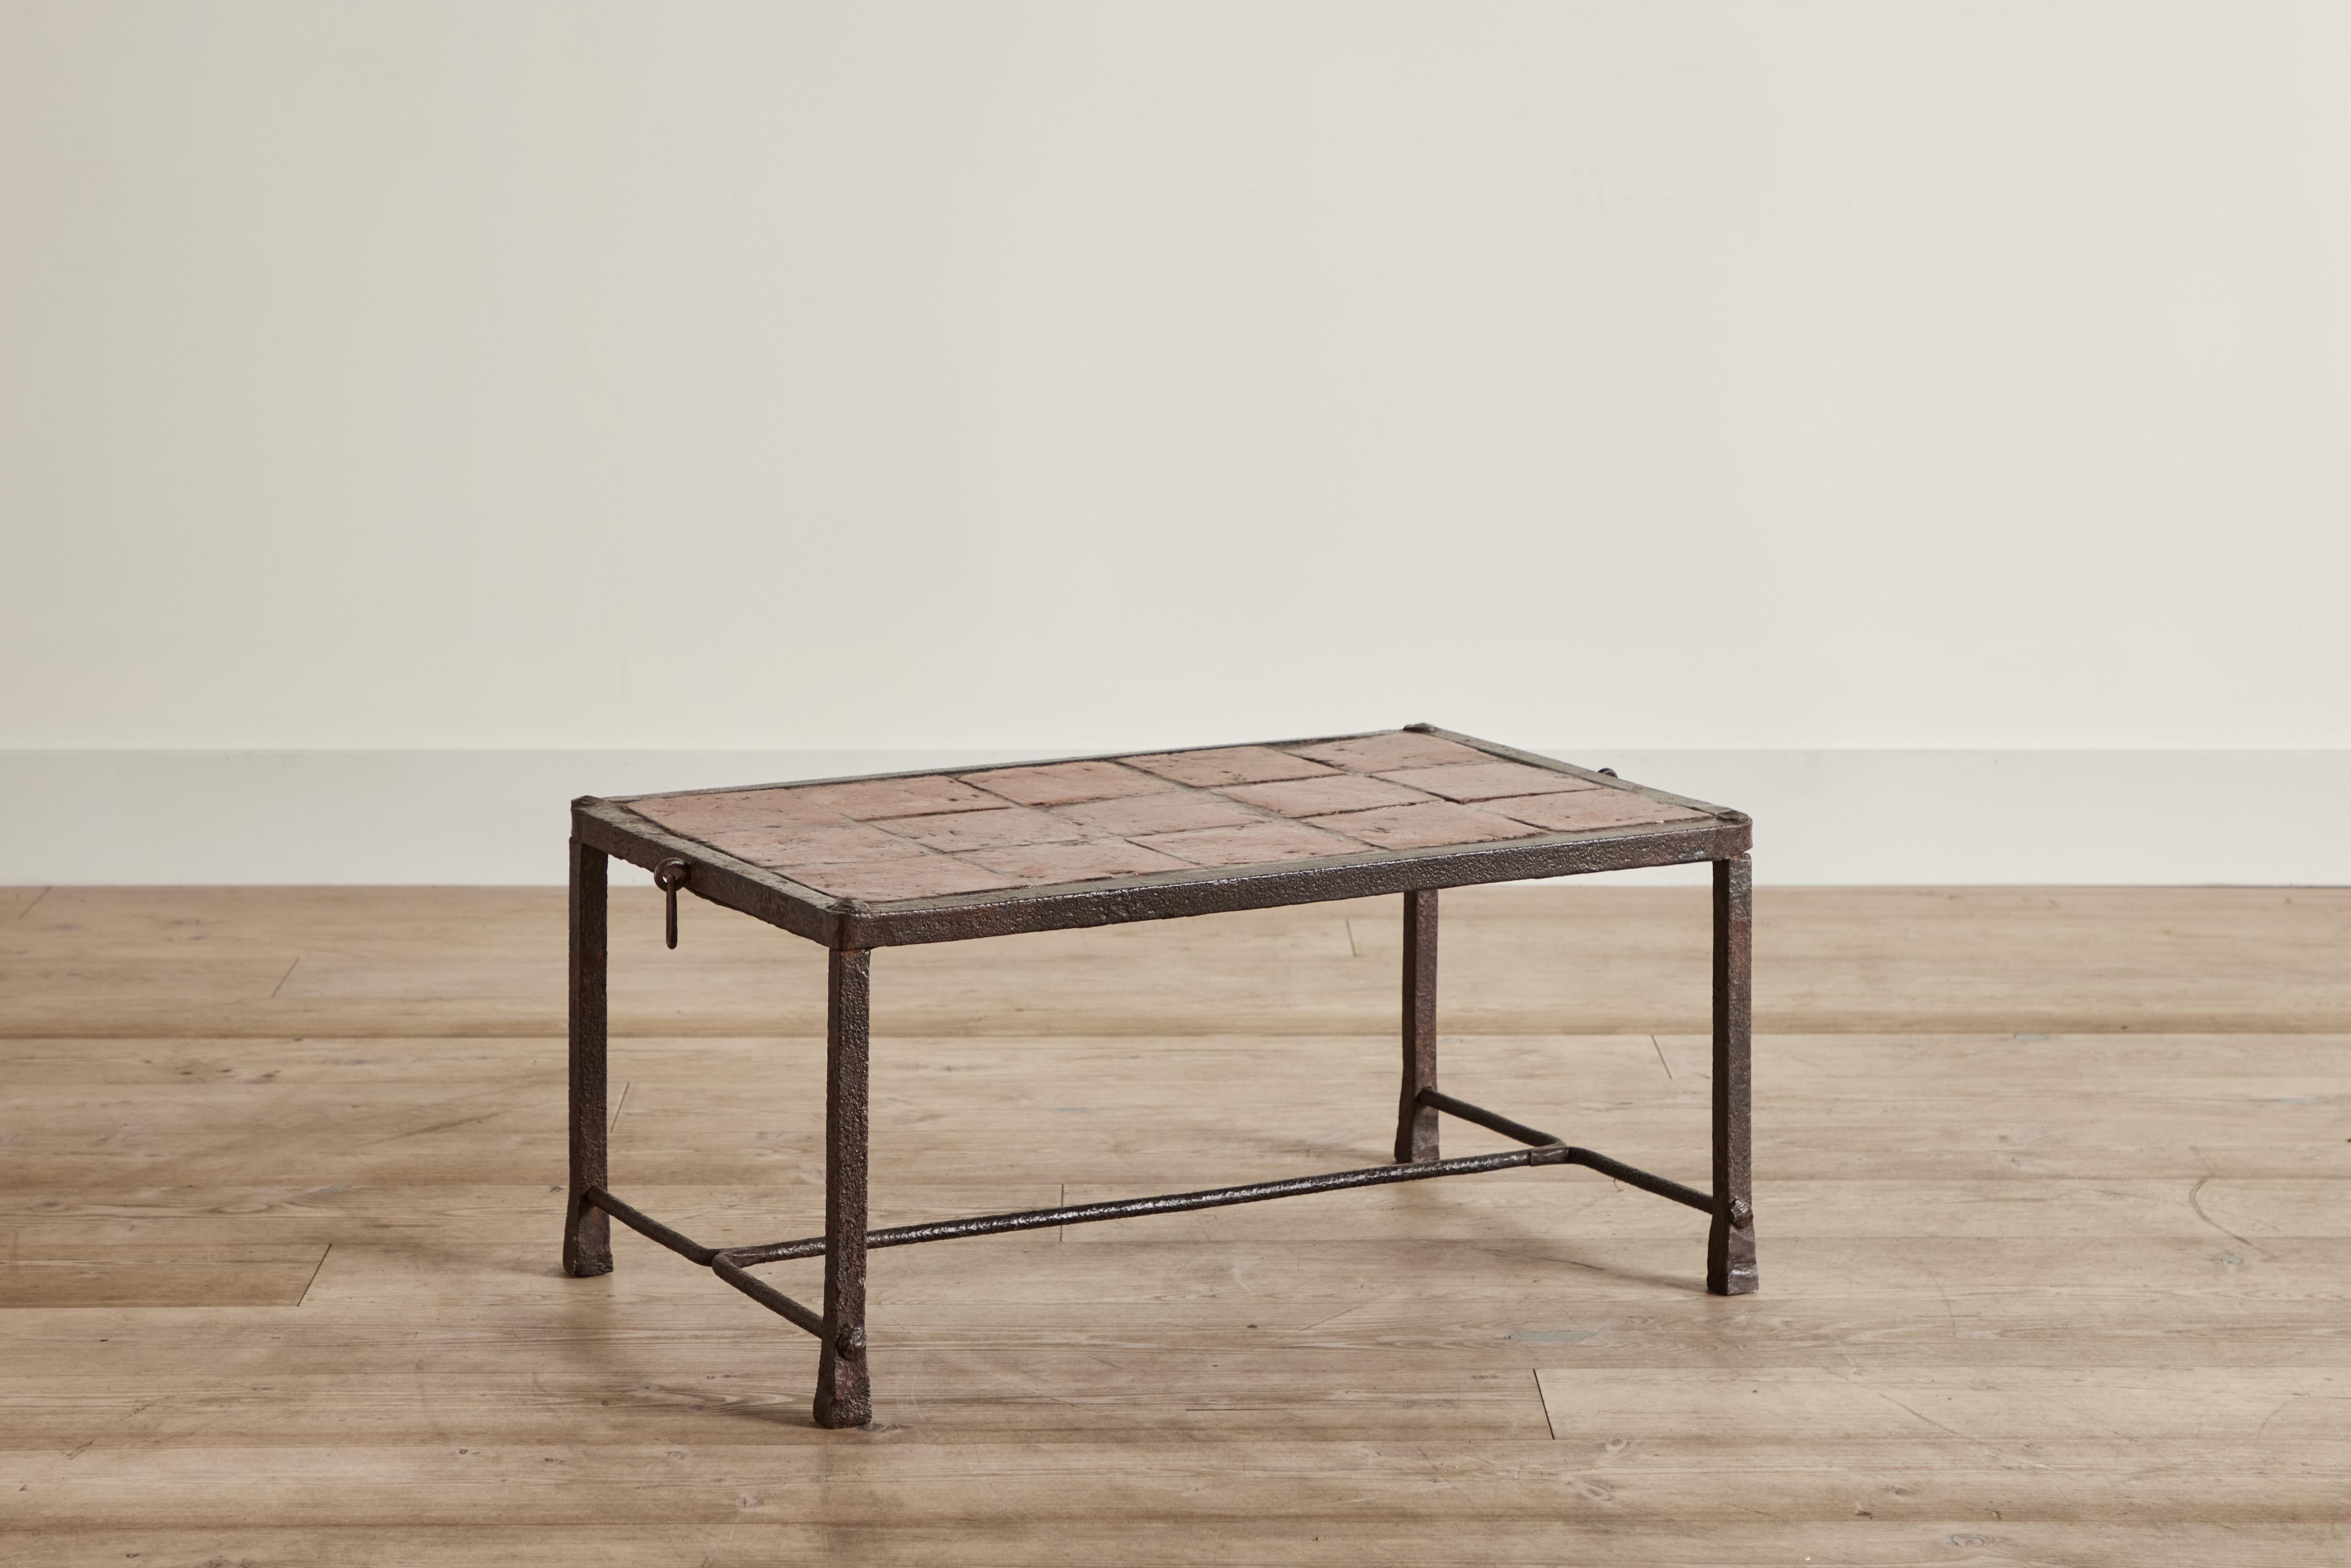  Iron and tile coffee table from Spain circa 1920. Some wear on metal and tile is consistent with age and use. 